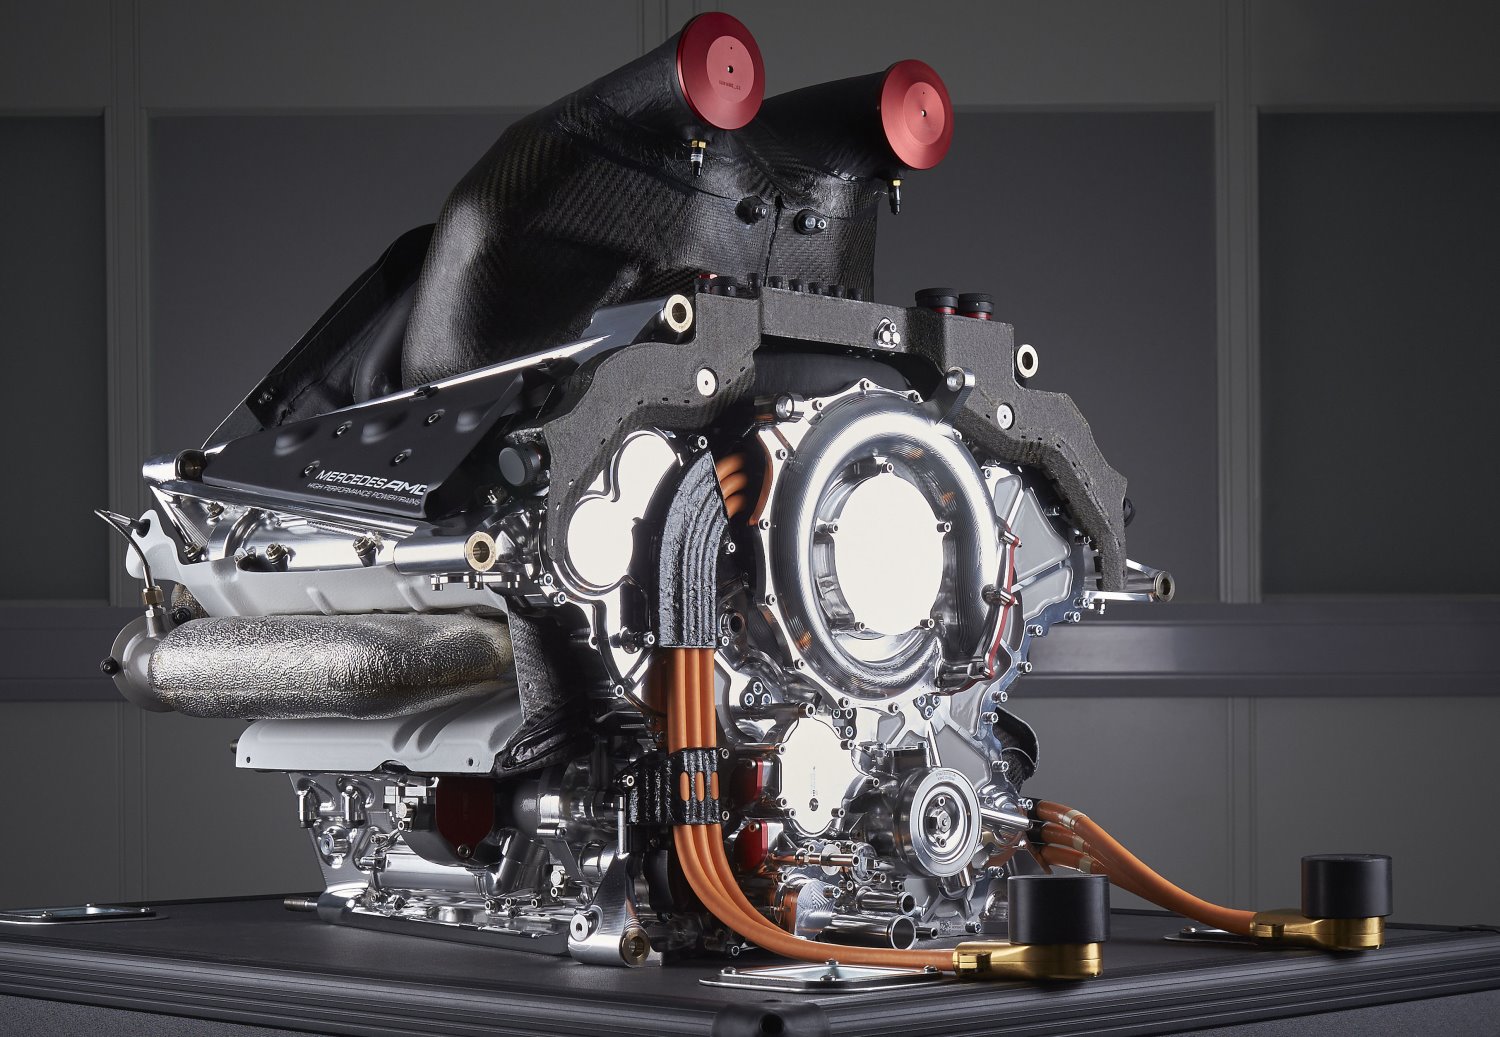 The Mercedes engine is now producing over 900 HP. No one else is even close